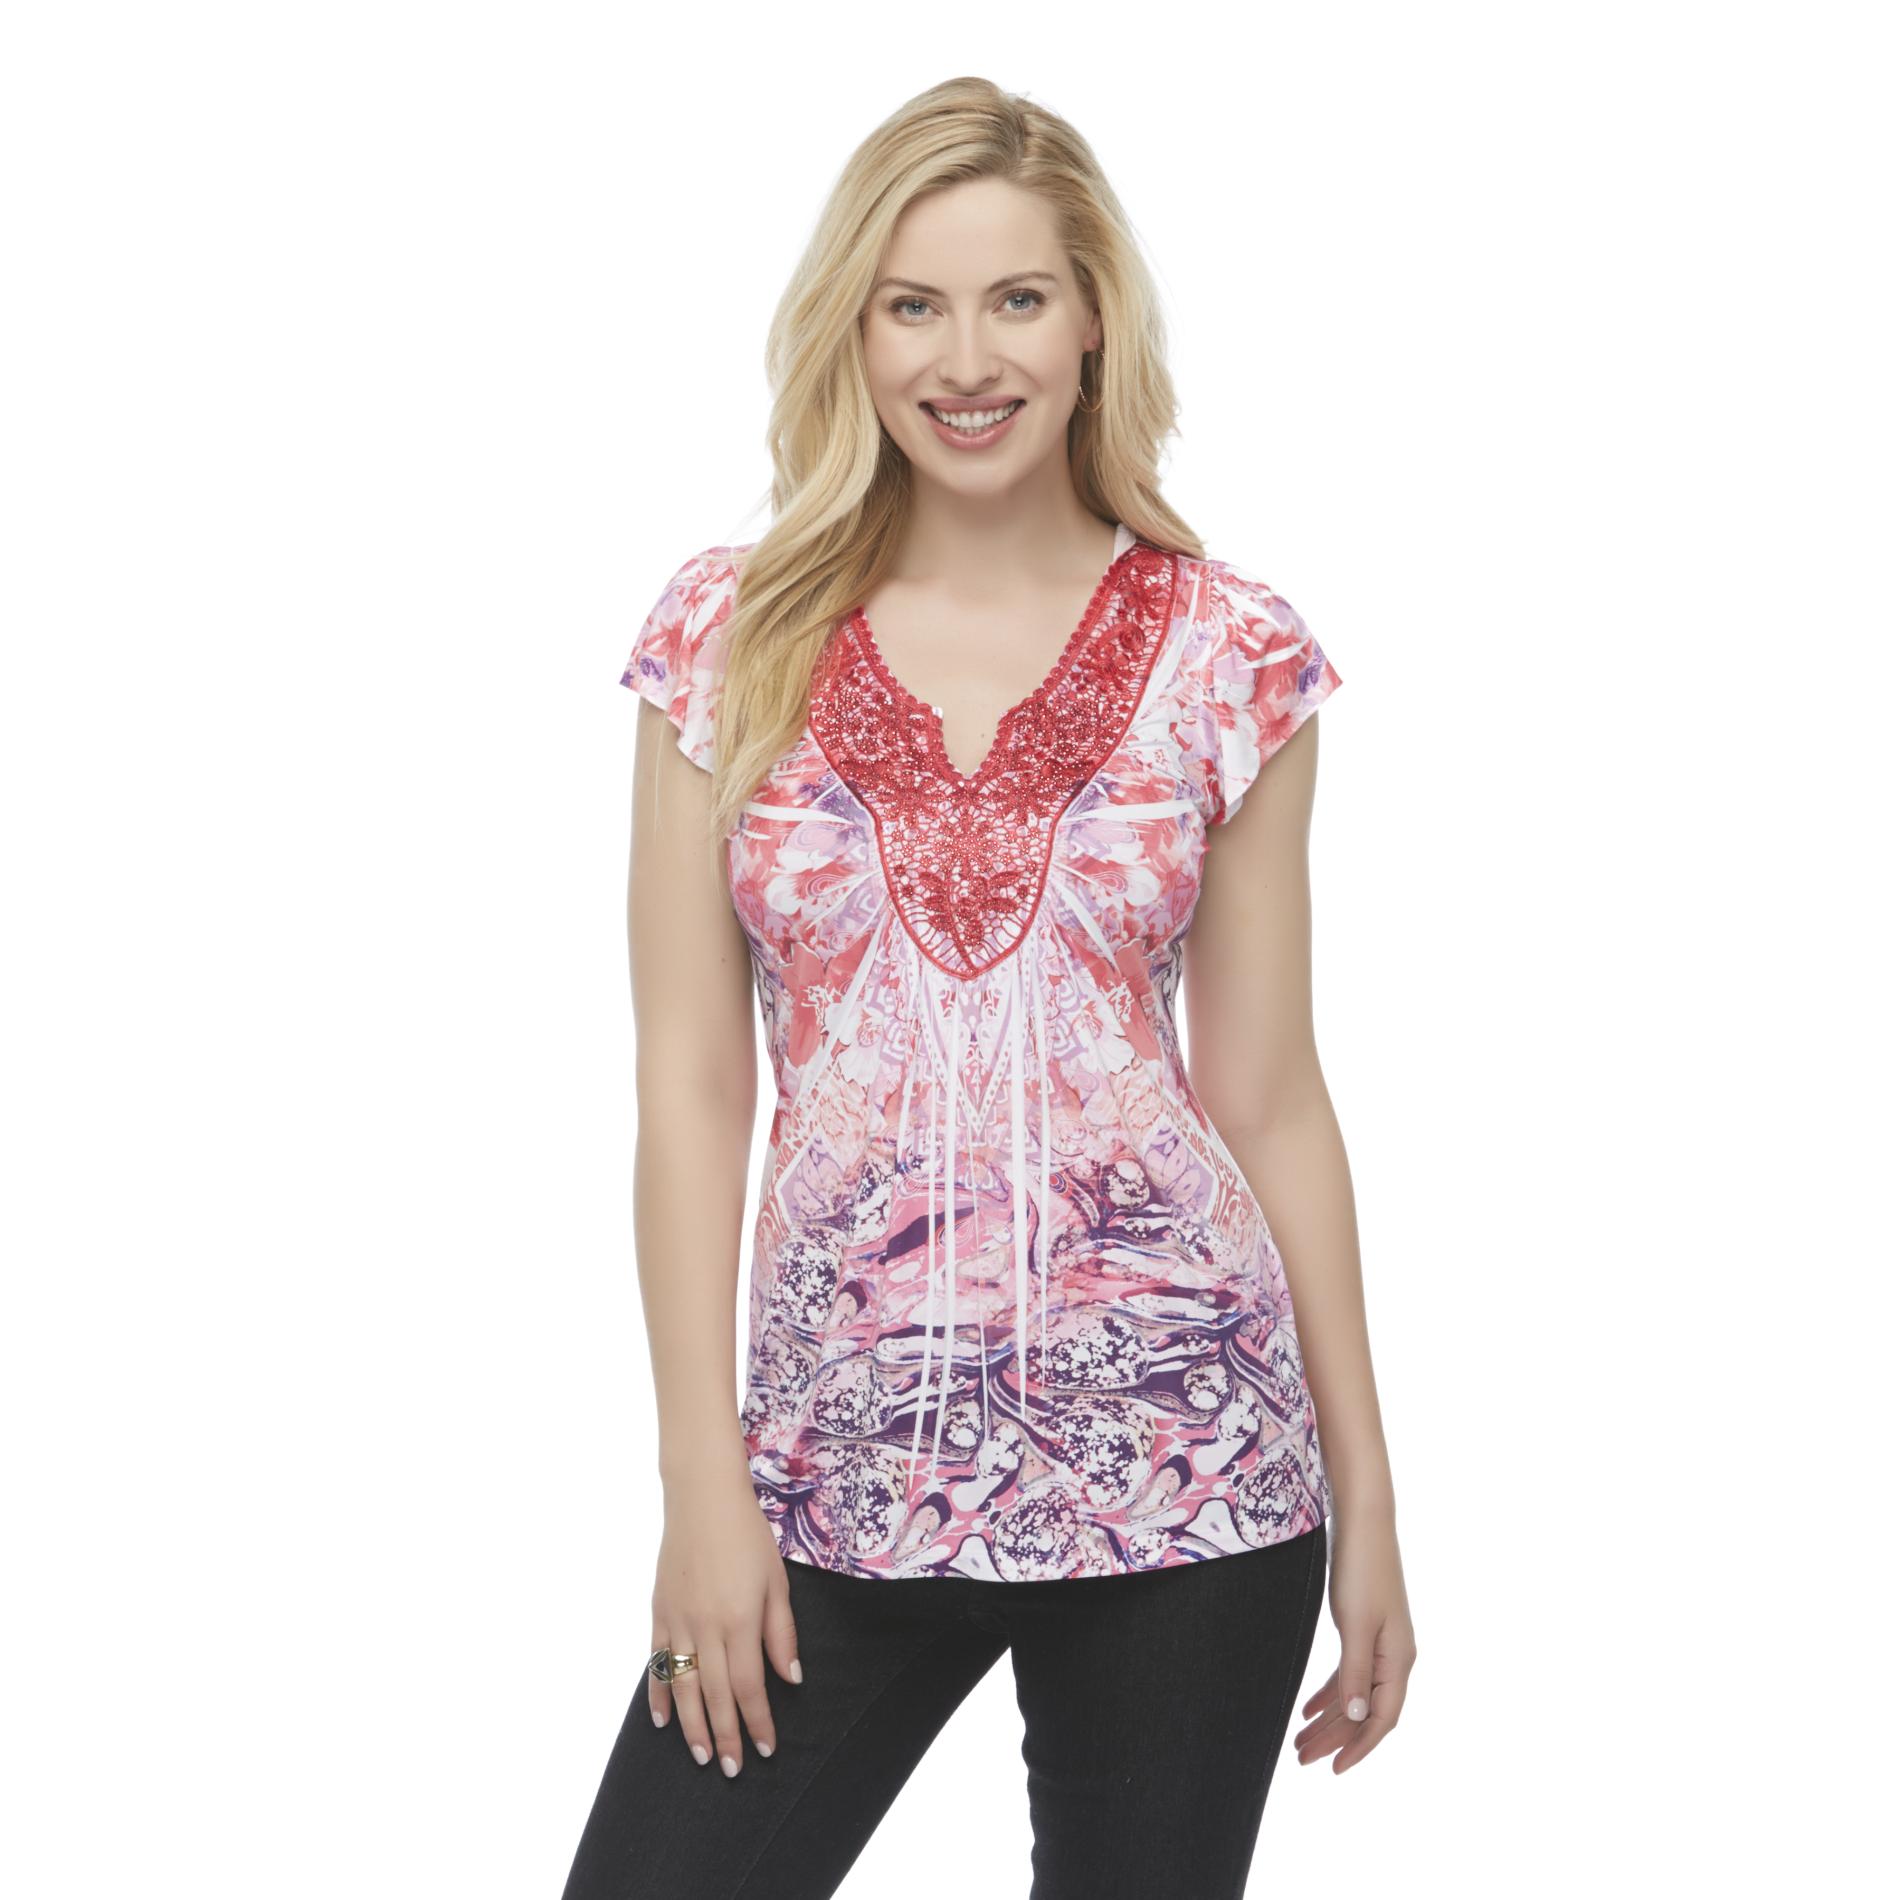 Covington Women's Studded Sublimation Top - Abstract Floral